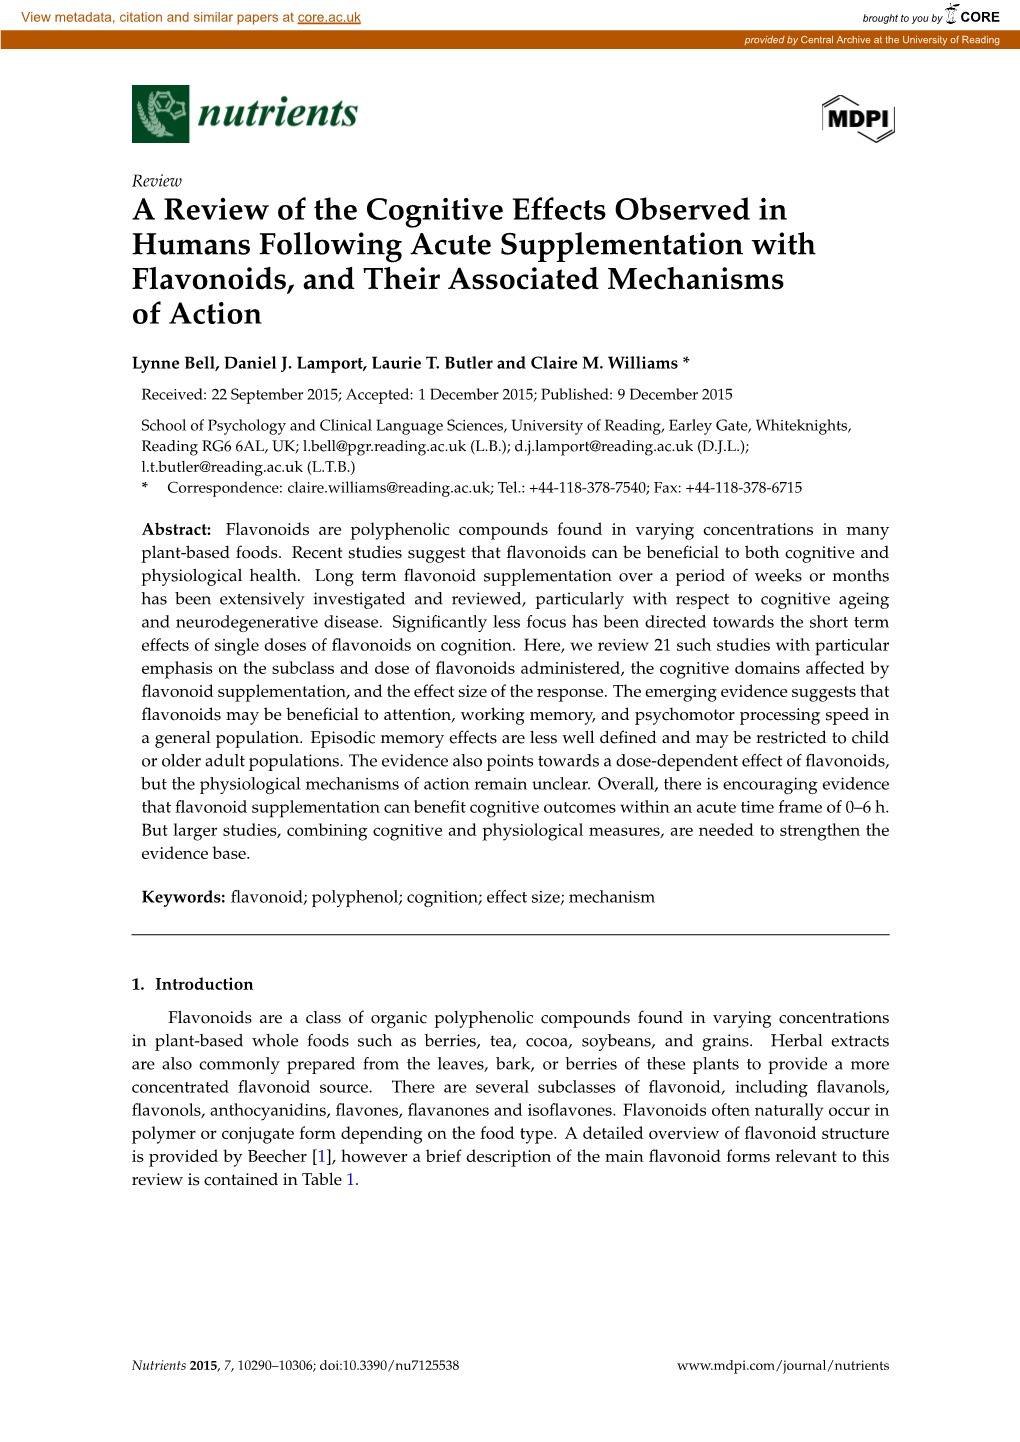 A Review of the Cognitive Effects Observed in Humans Following Acute Supplementation with Flavonoids, and Their Associated Mechanisms of Action